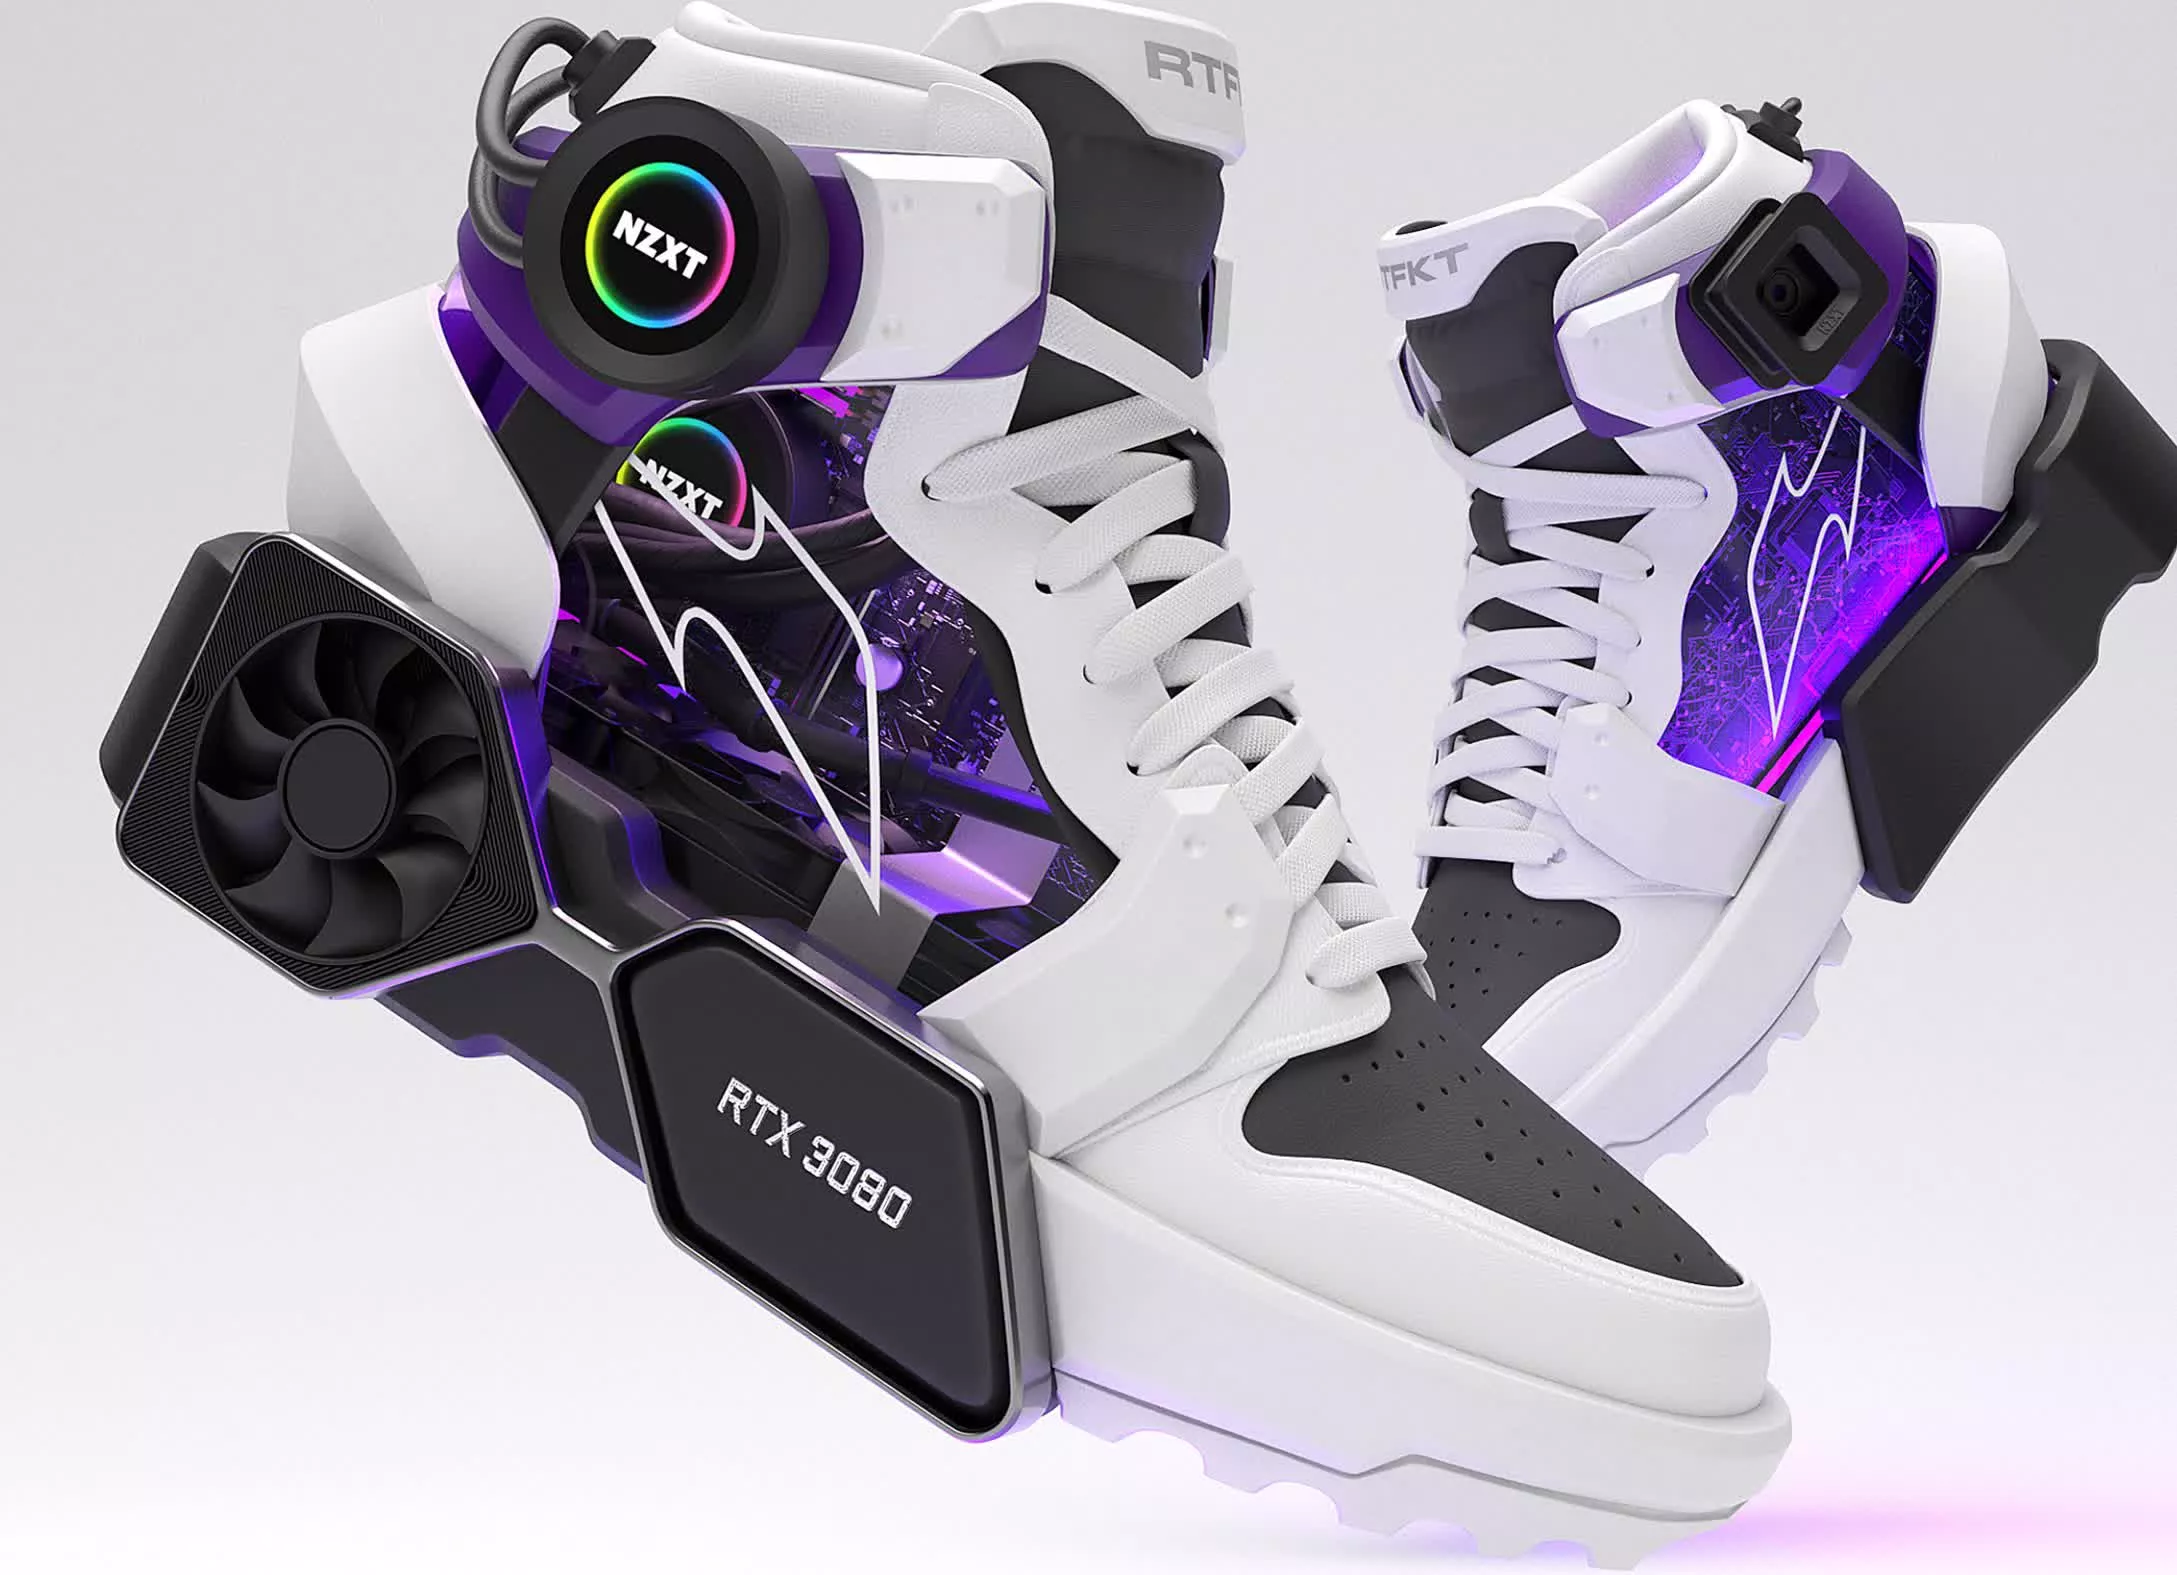 Would you buy the RTX 3080 sneakers?